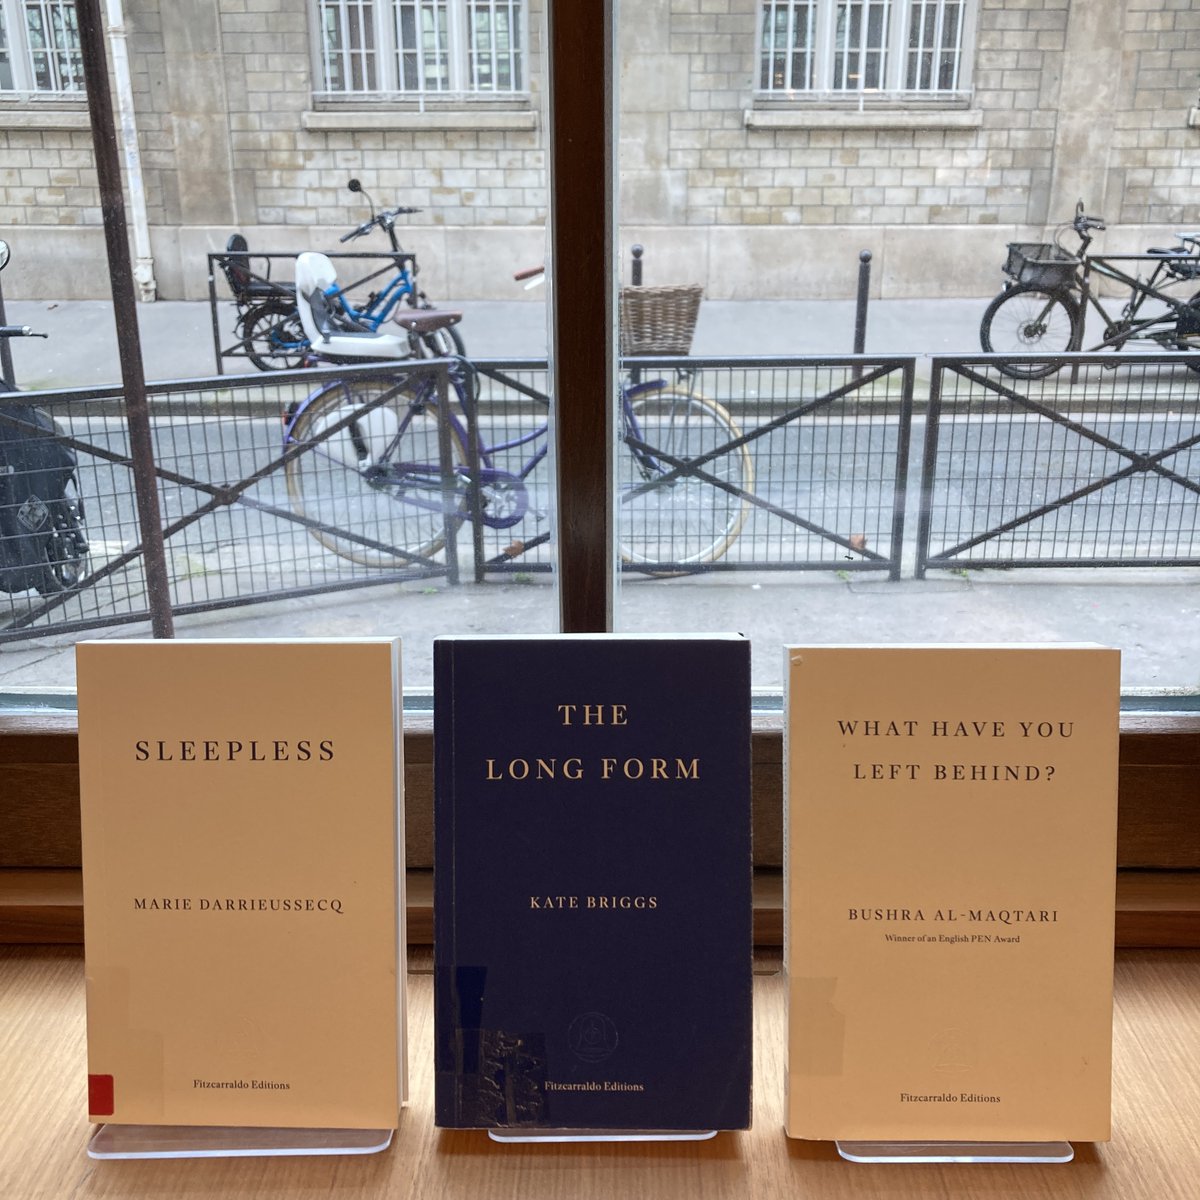 It's Fitzcarraldo February here at the Library, and we're looking forward to welcoming a series of guest speakers published by programming partner @FitzcarraldoEds. Drop by the Members' Lounge and browse our display of books by authors speaking at the Library this month!